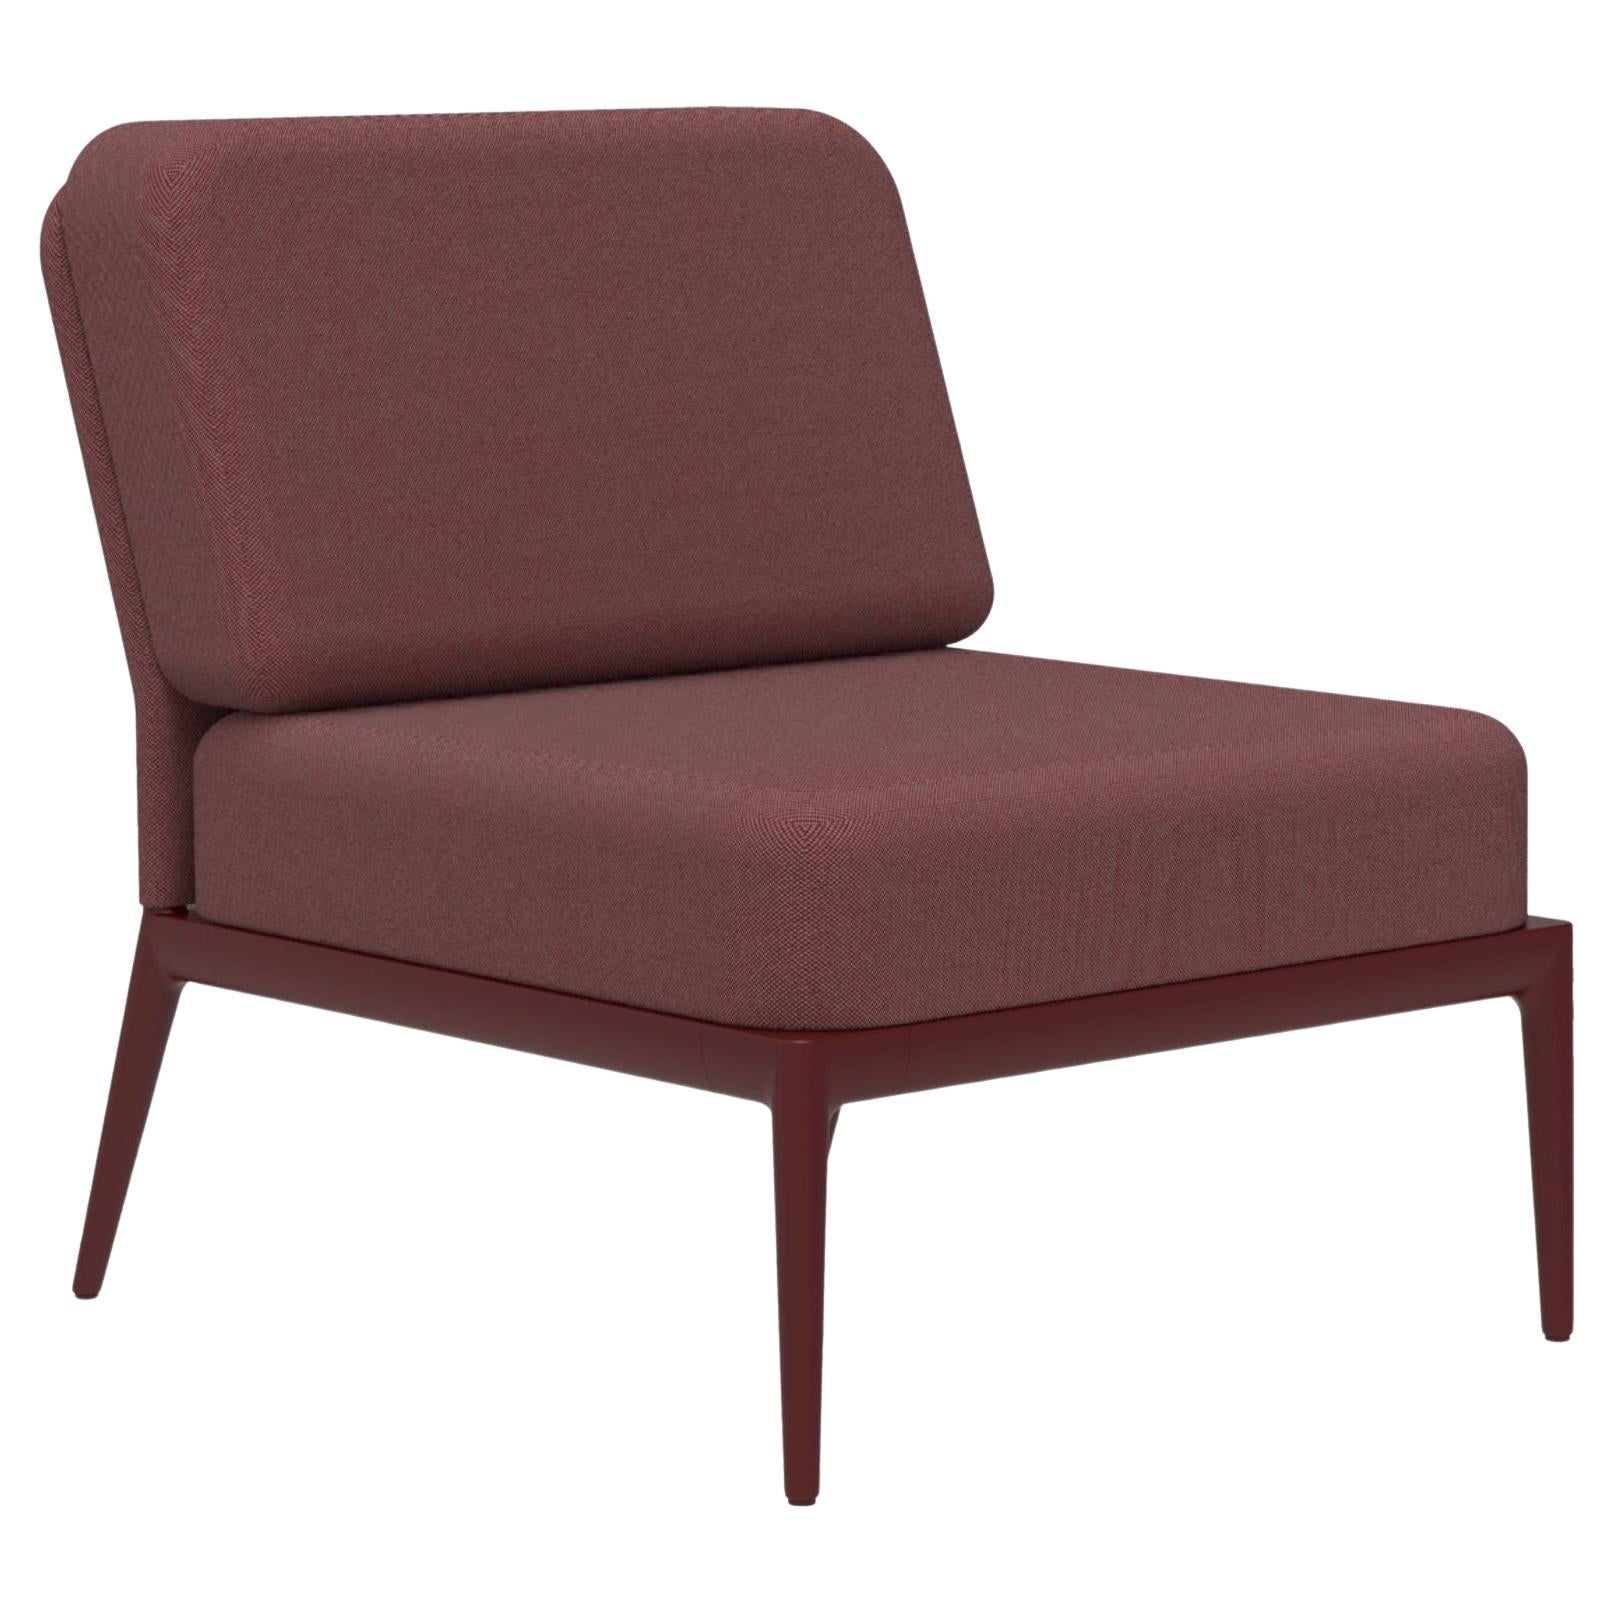 Cover Burgundy Central Modular Sofa by Mowee